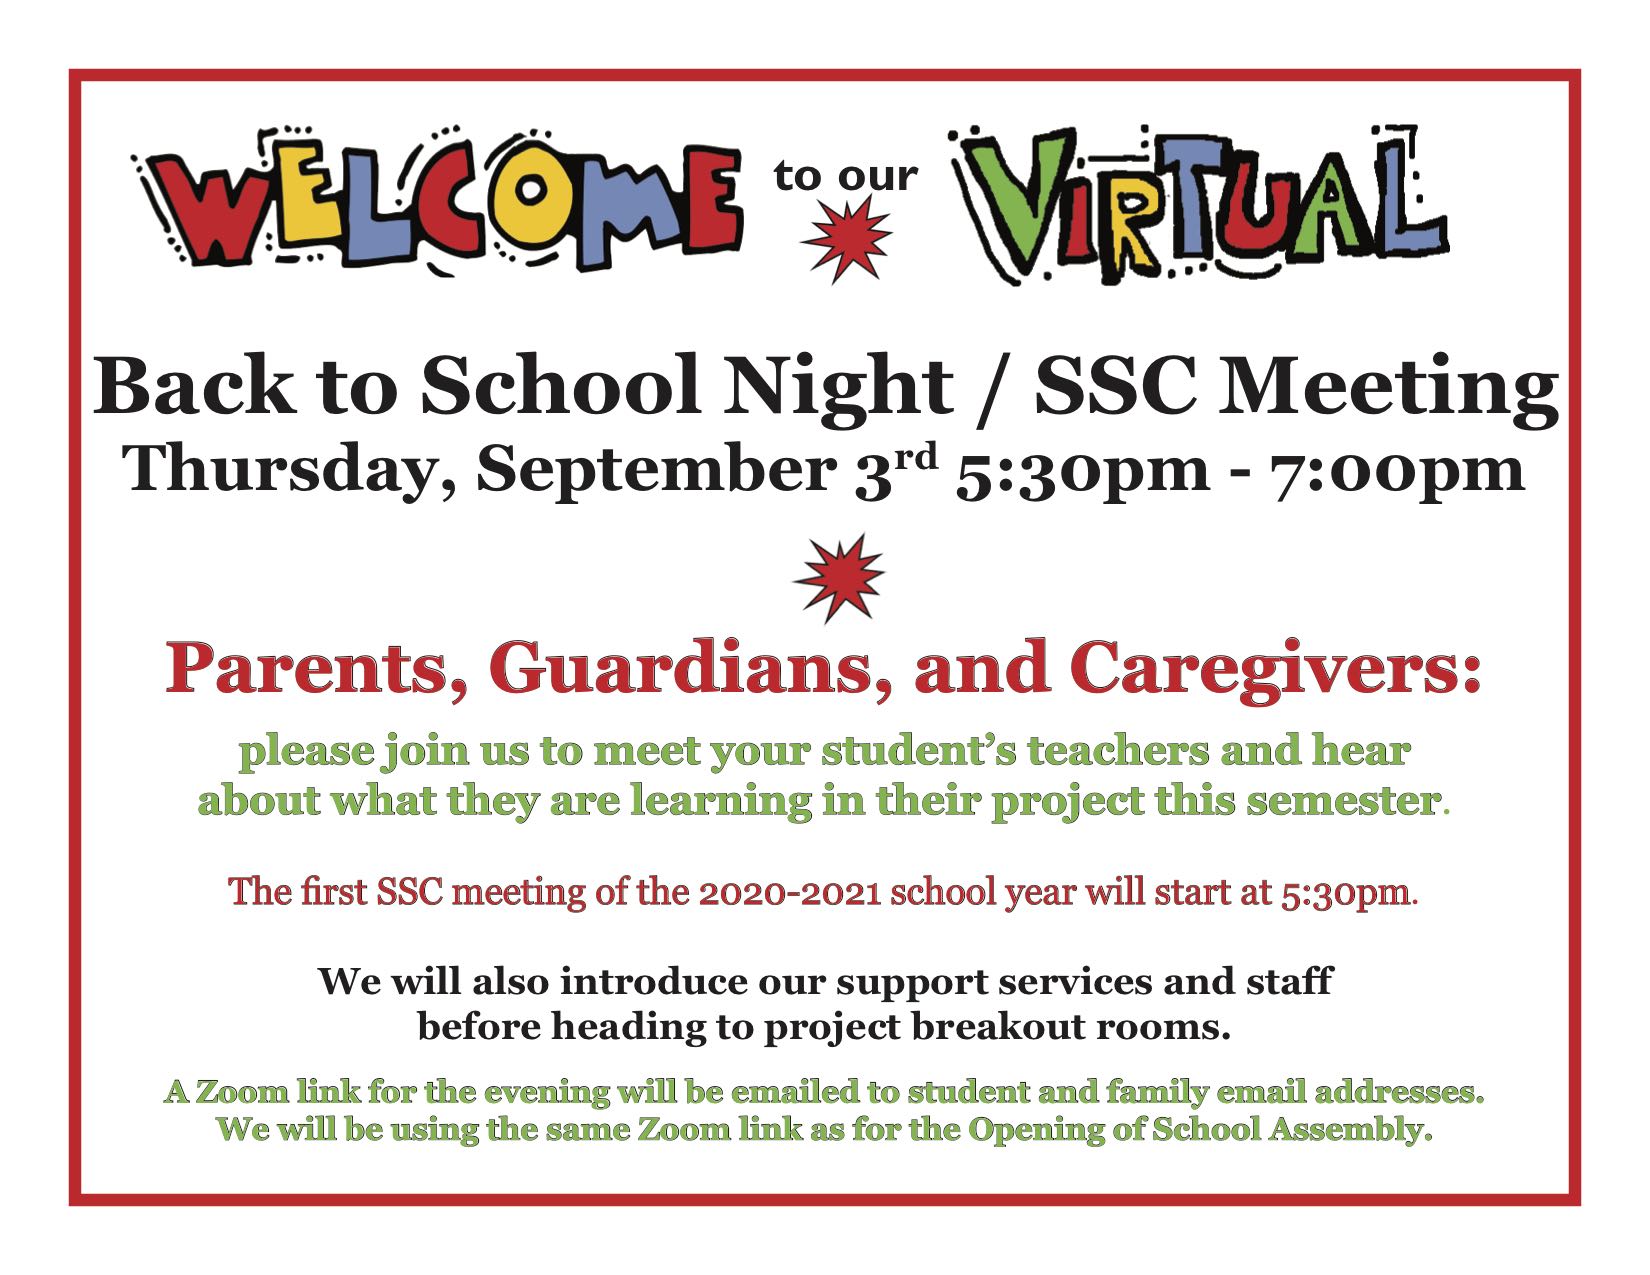 Flyer announcing Back to School Night Thursday Sept. 3 from 5:30-7pm